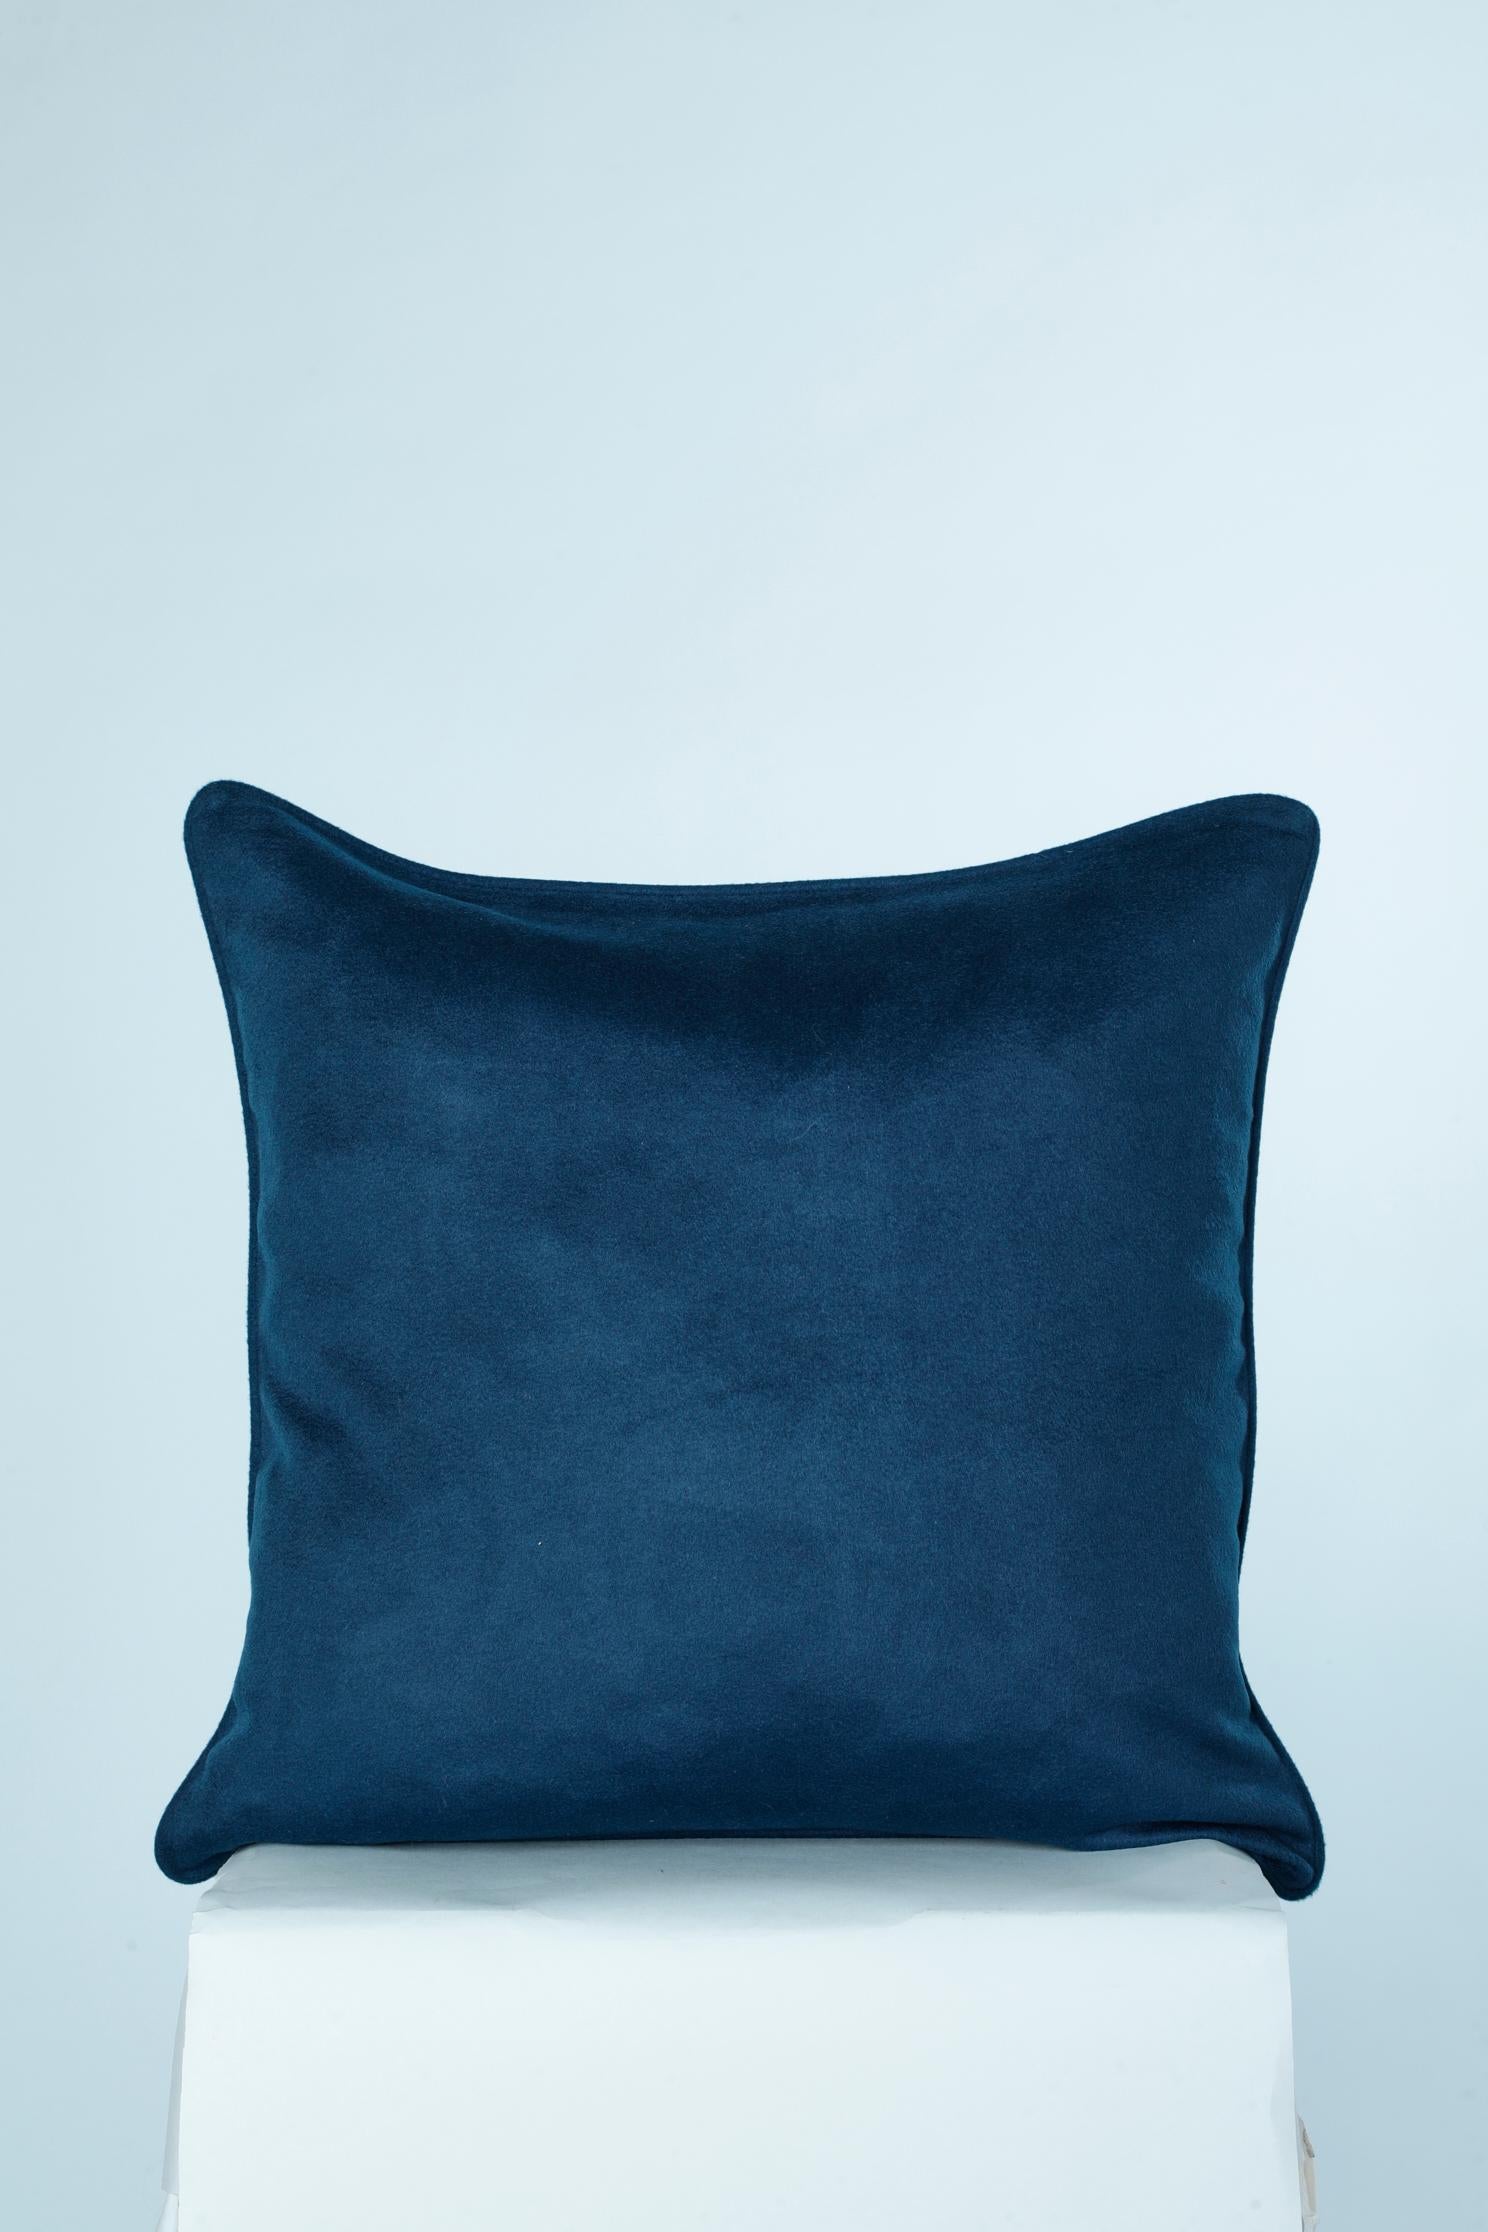 Women's or Men's Night blue cashmere pillow case with 